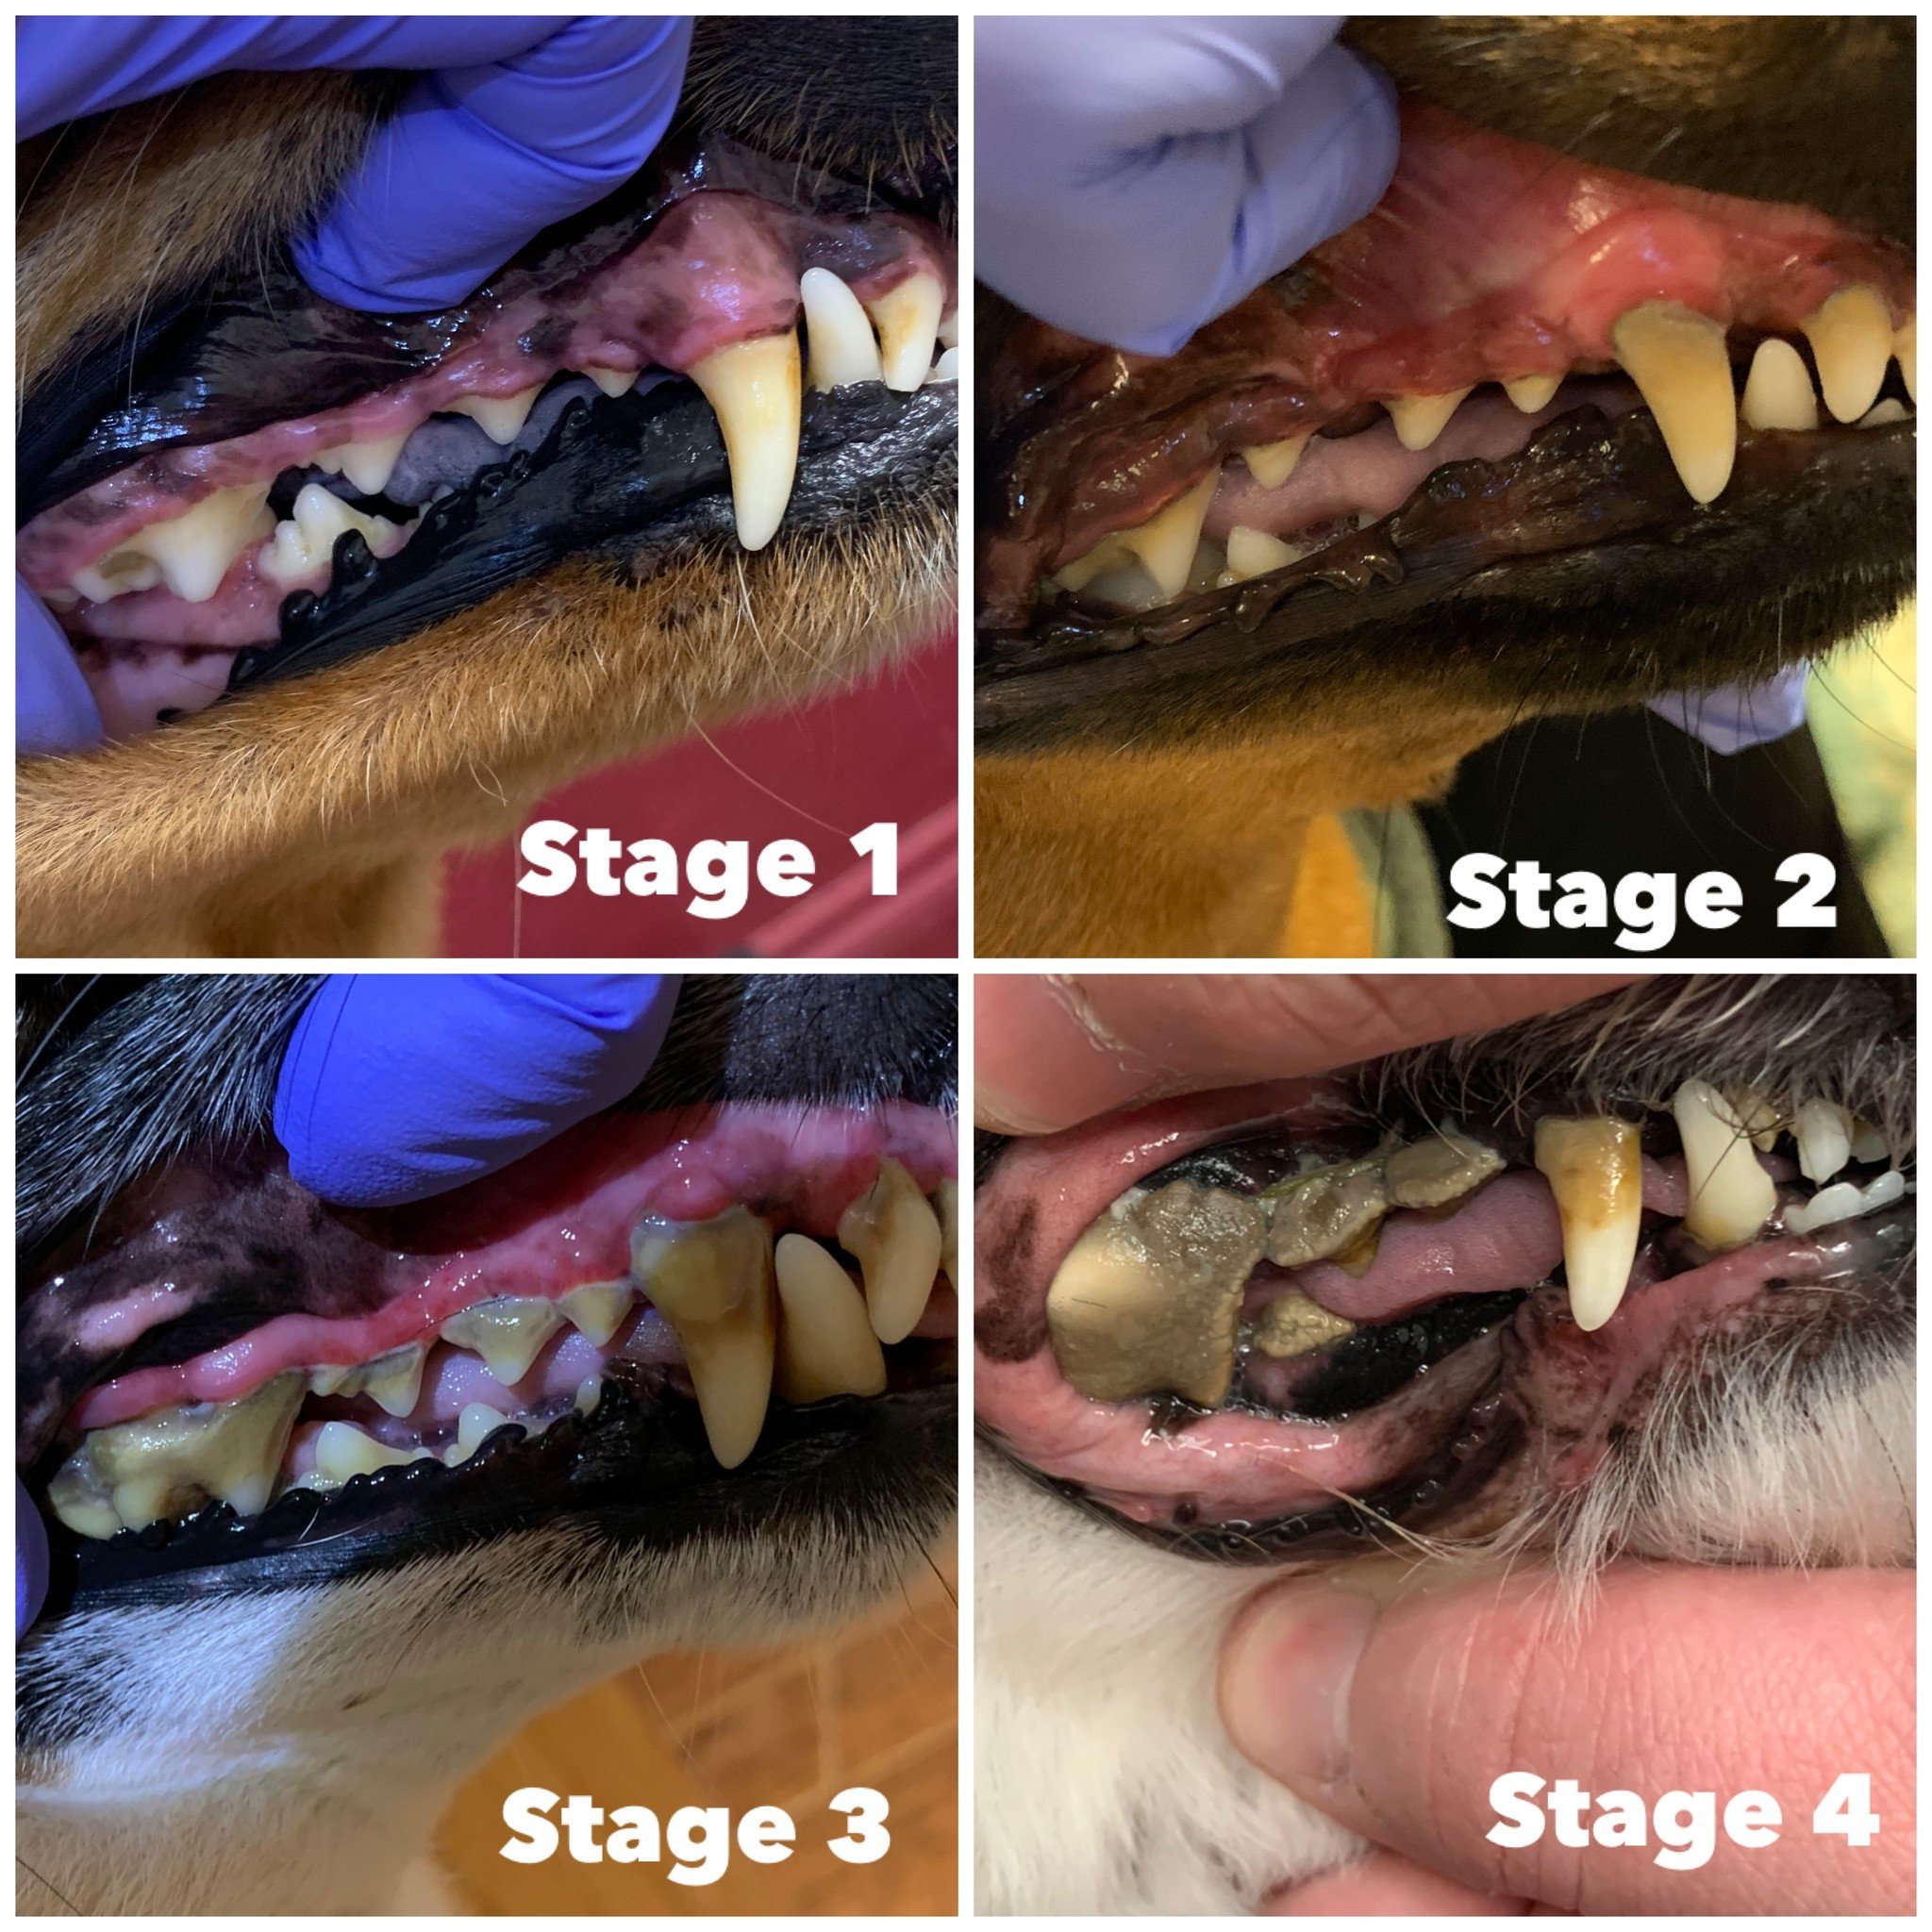 If your dog is in Stages one or two, he might be a candidate for Non Anesthesia Dental.